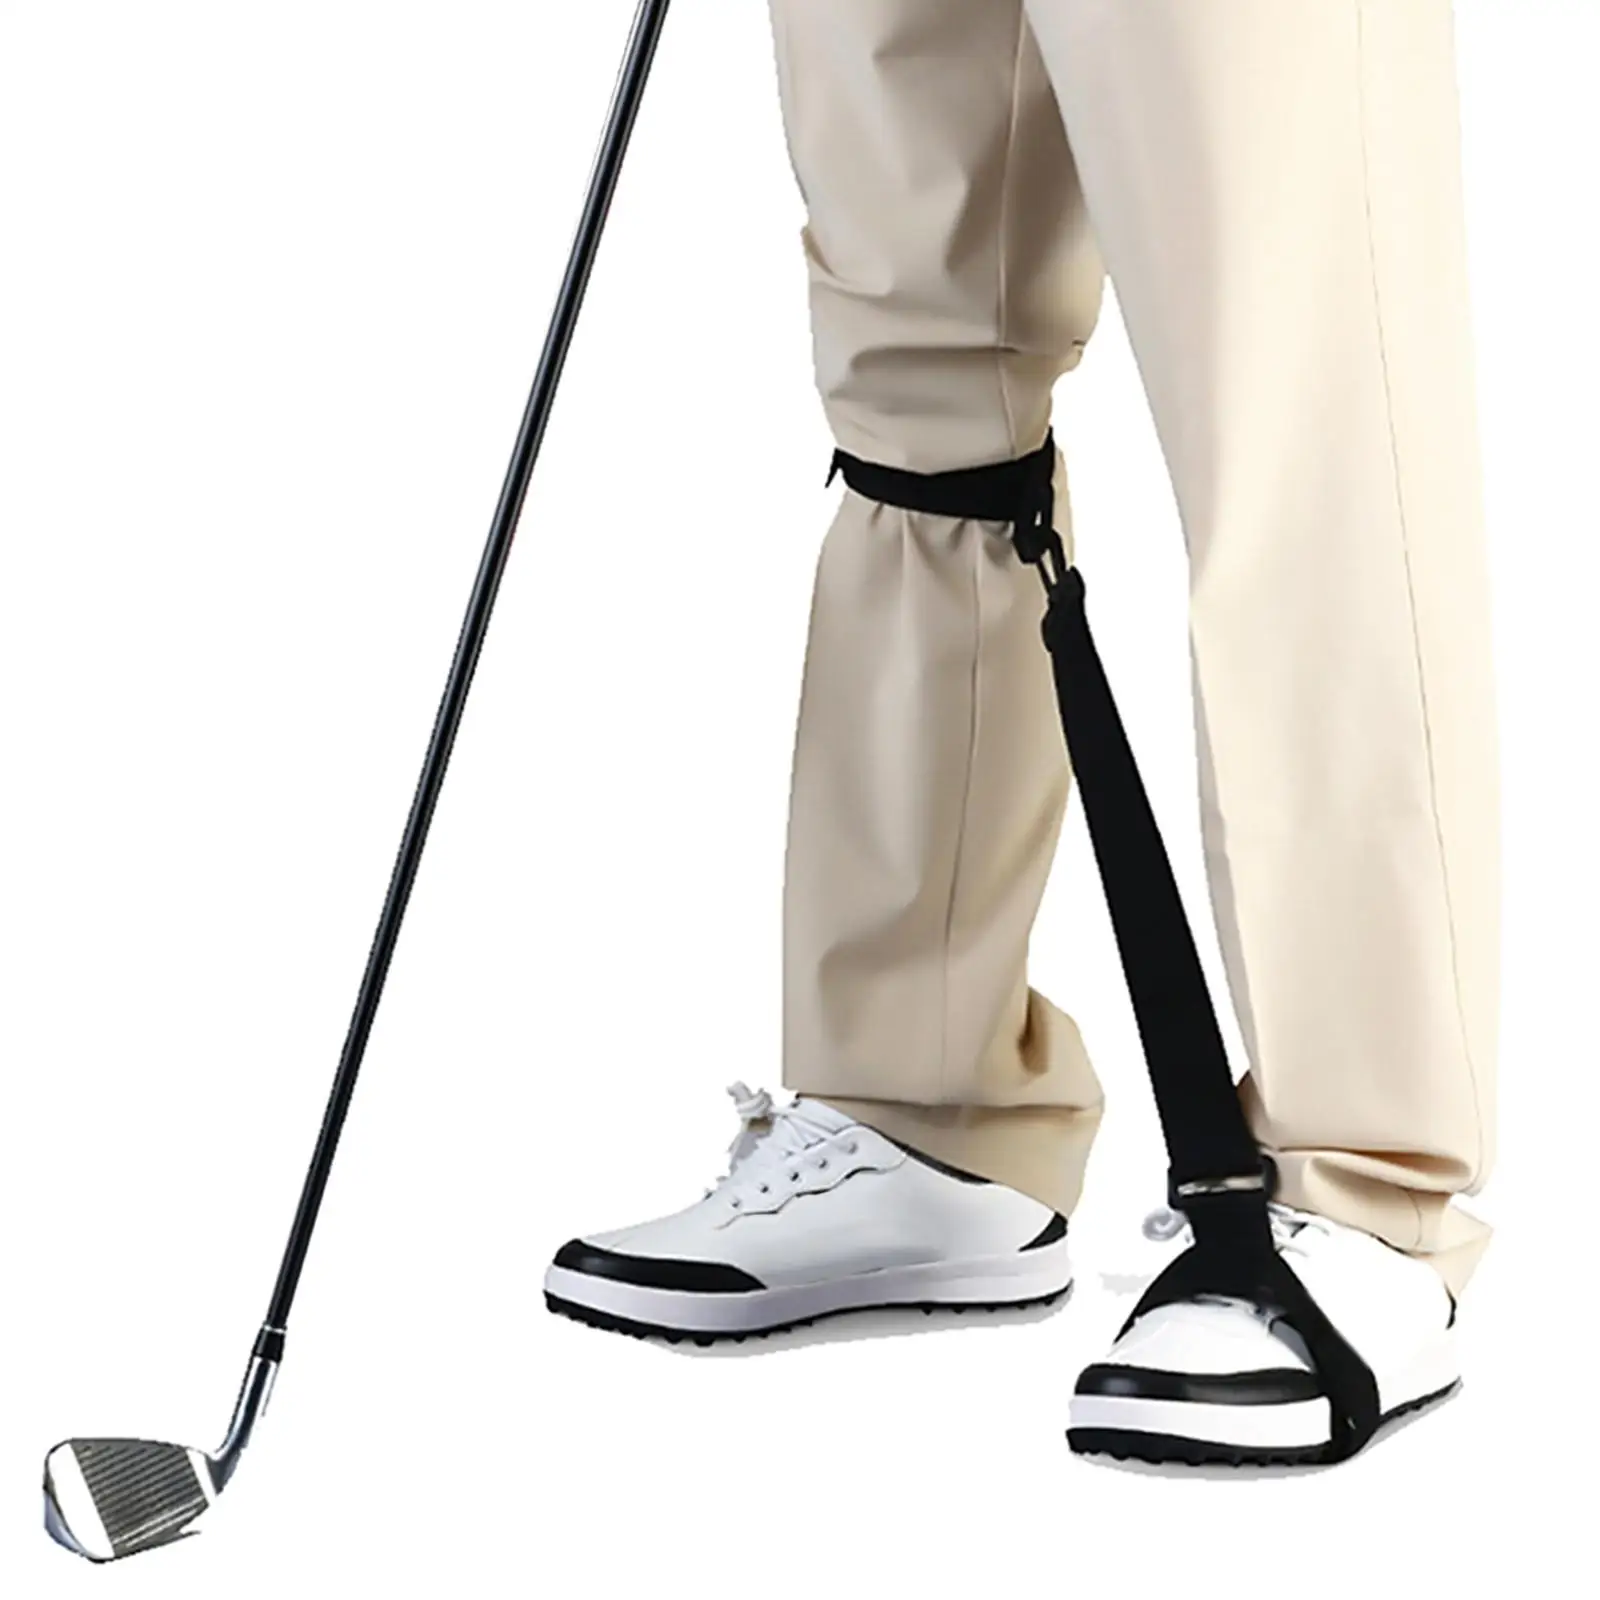 Golf Leg Correction Belt Adjustable Lightweight to Forming Muscle Memory Leg Strap for Golfers Adults Beginners Golf Accessories